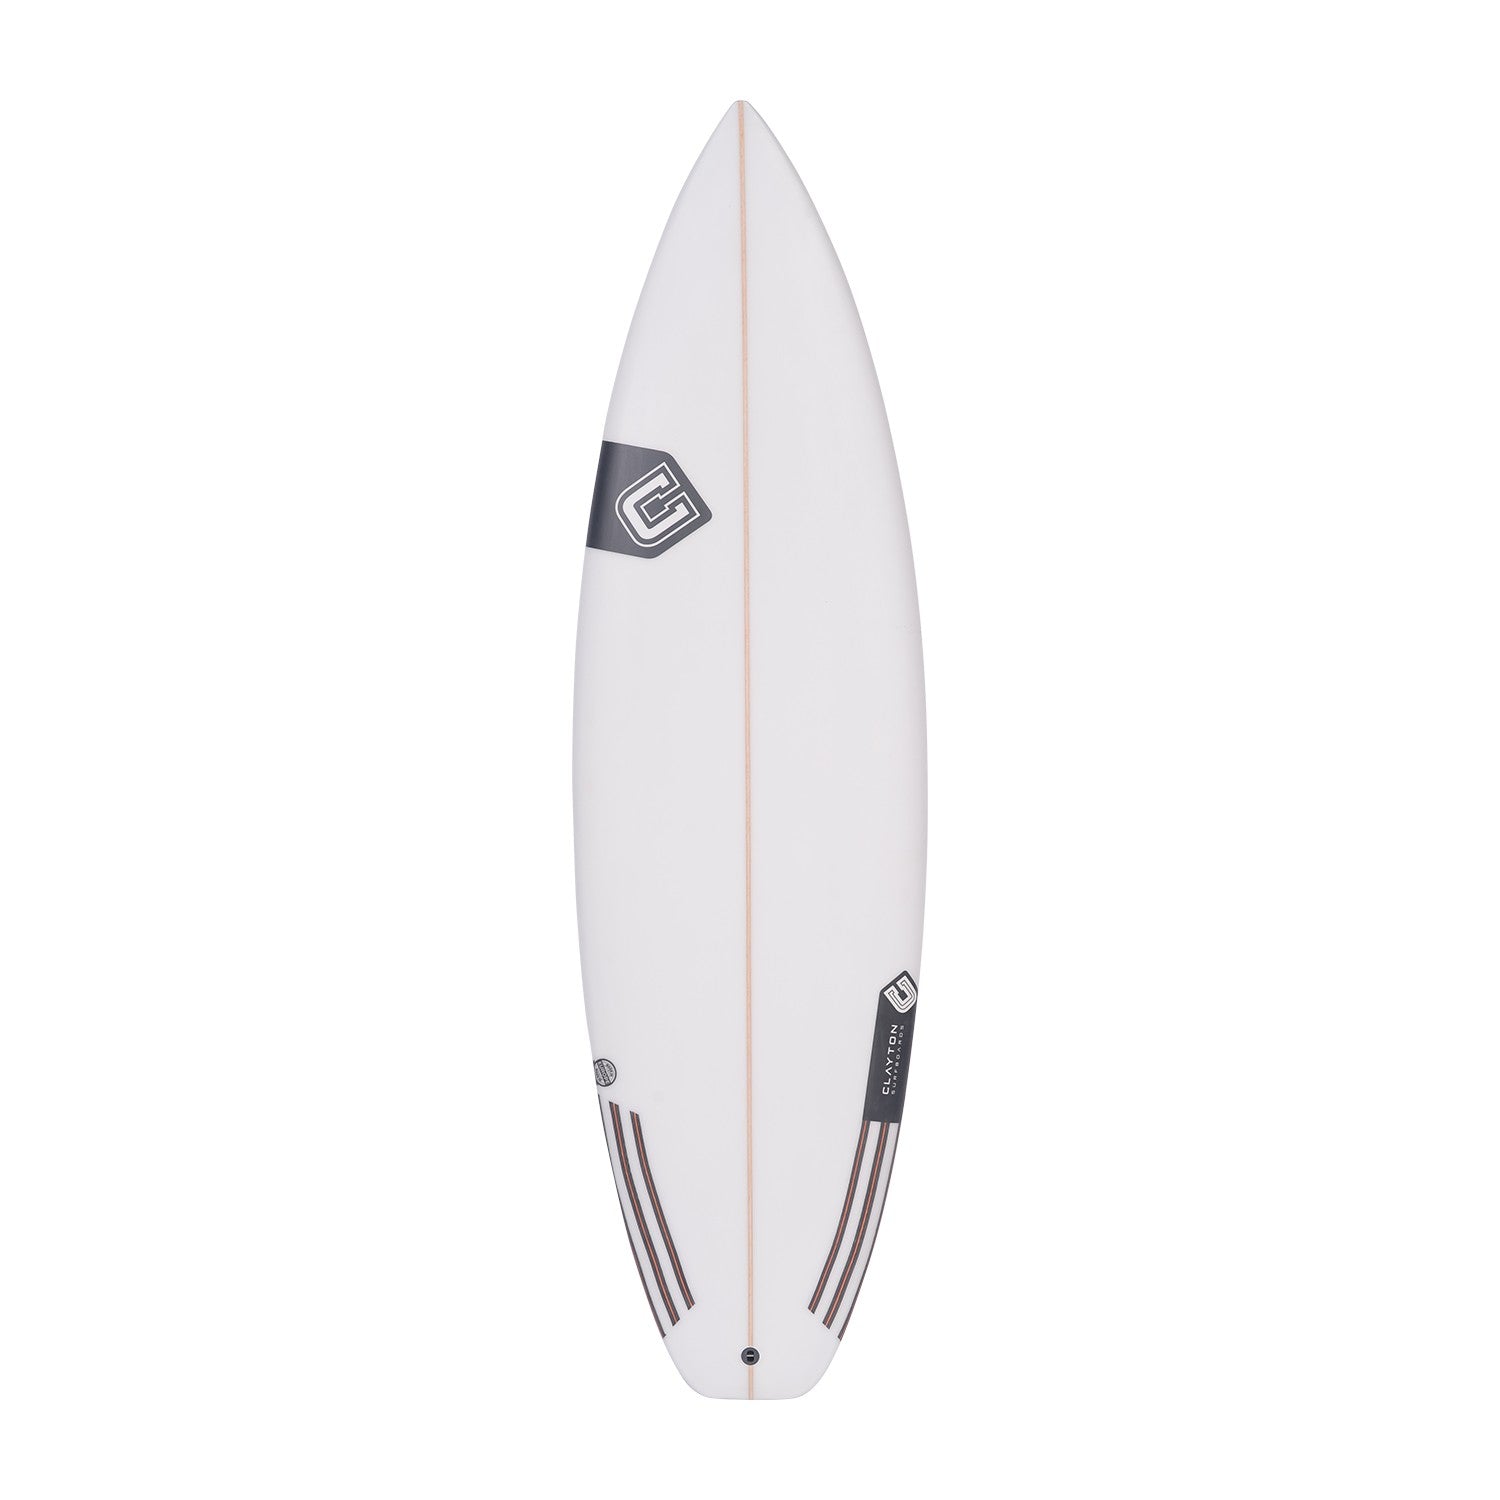 CLAYTON Surfboards - Trickster (PU) Futures - 6'0